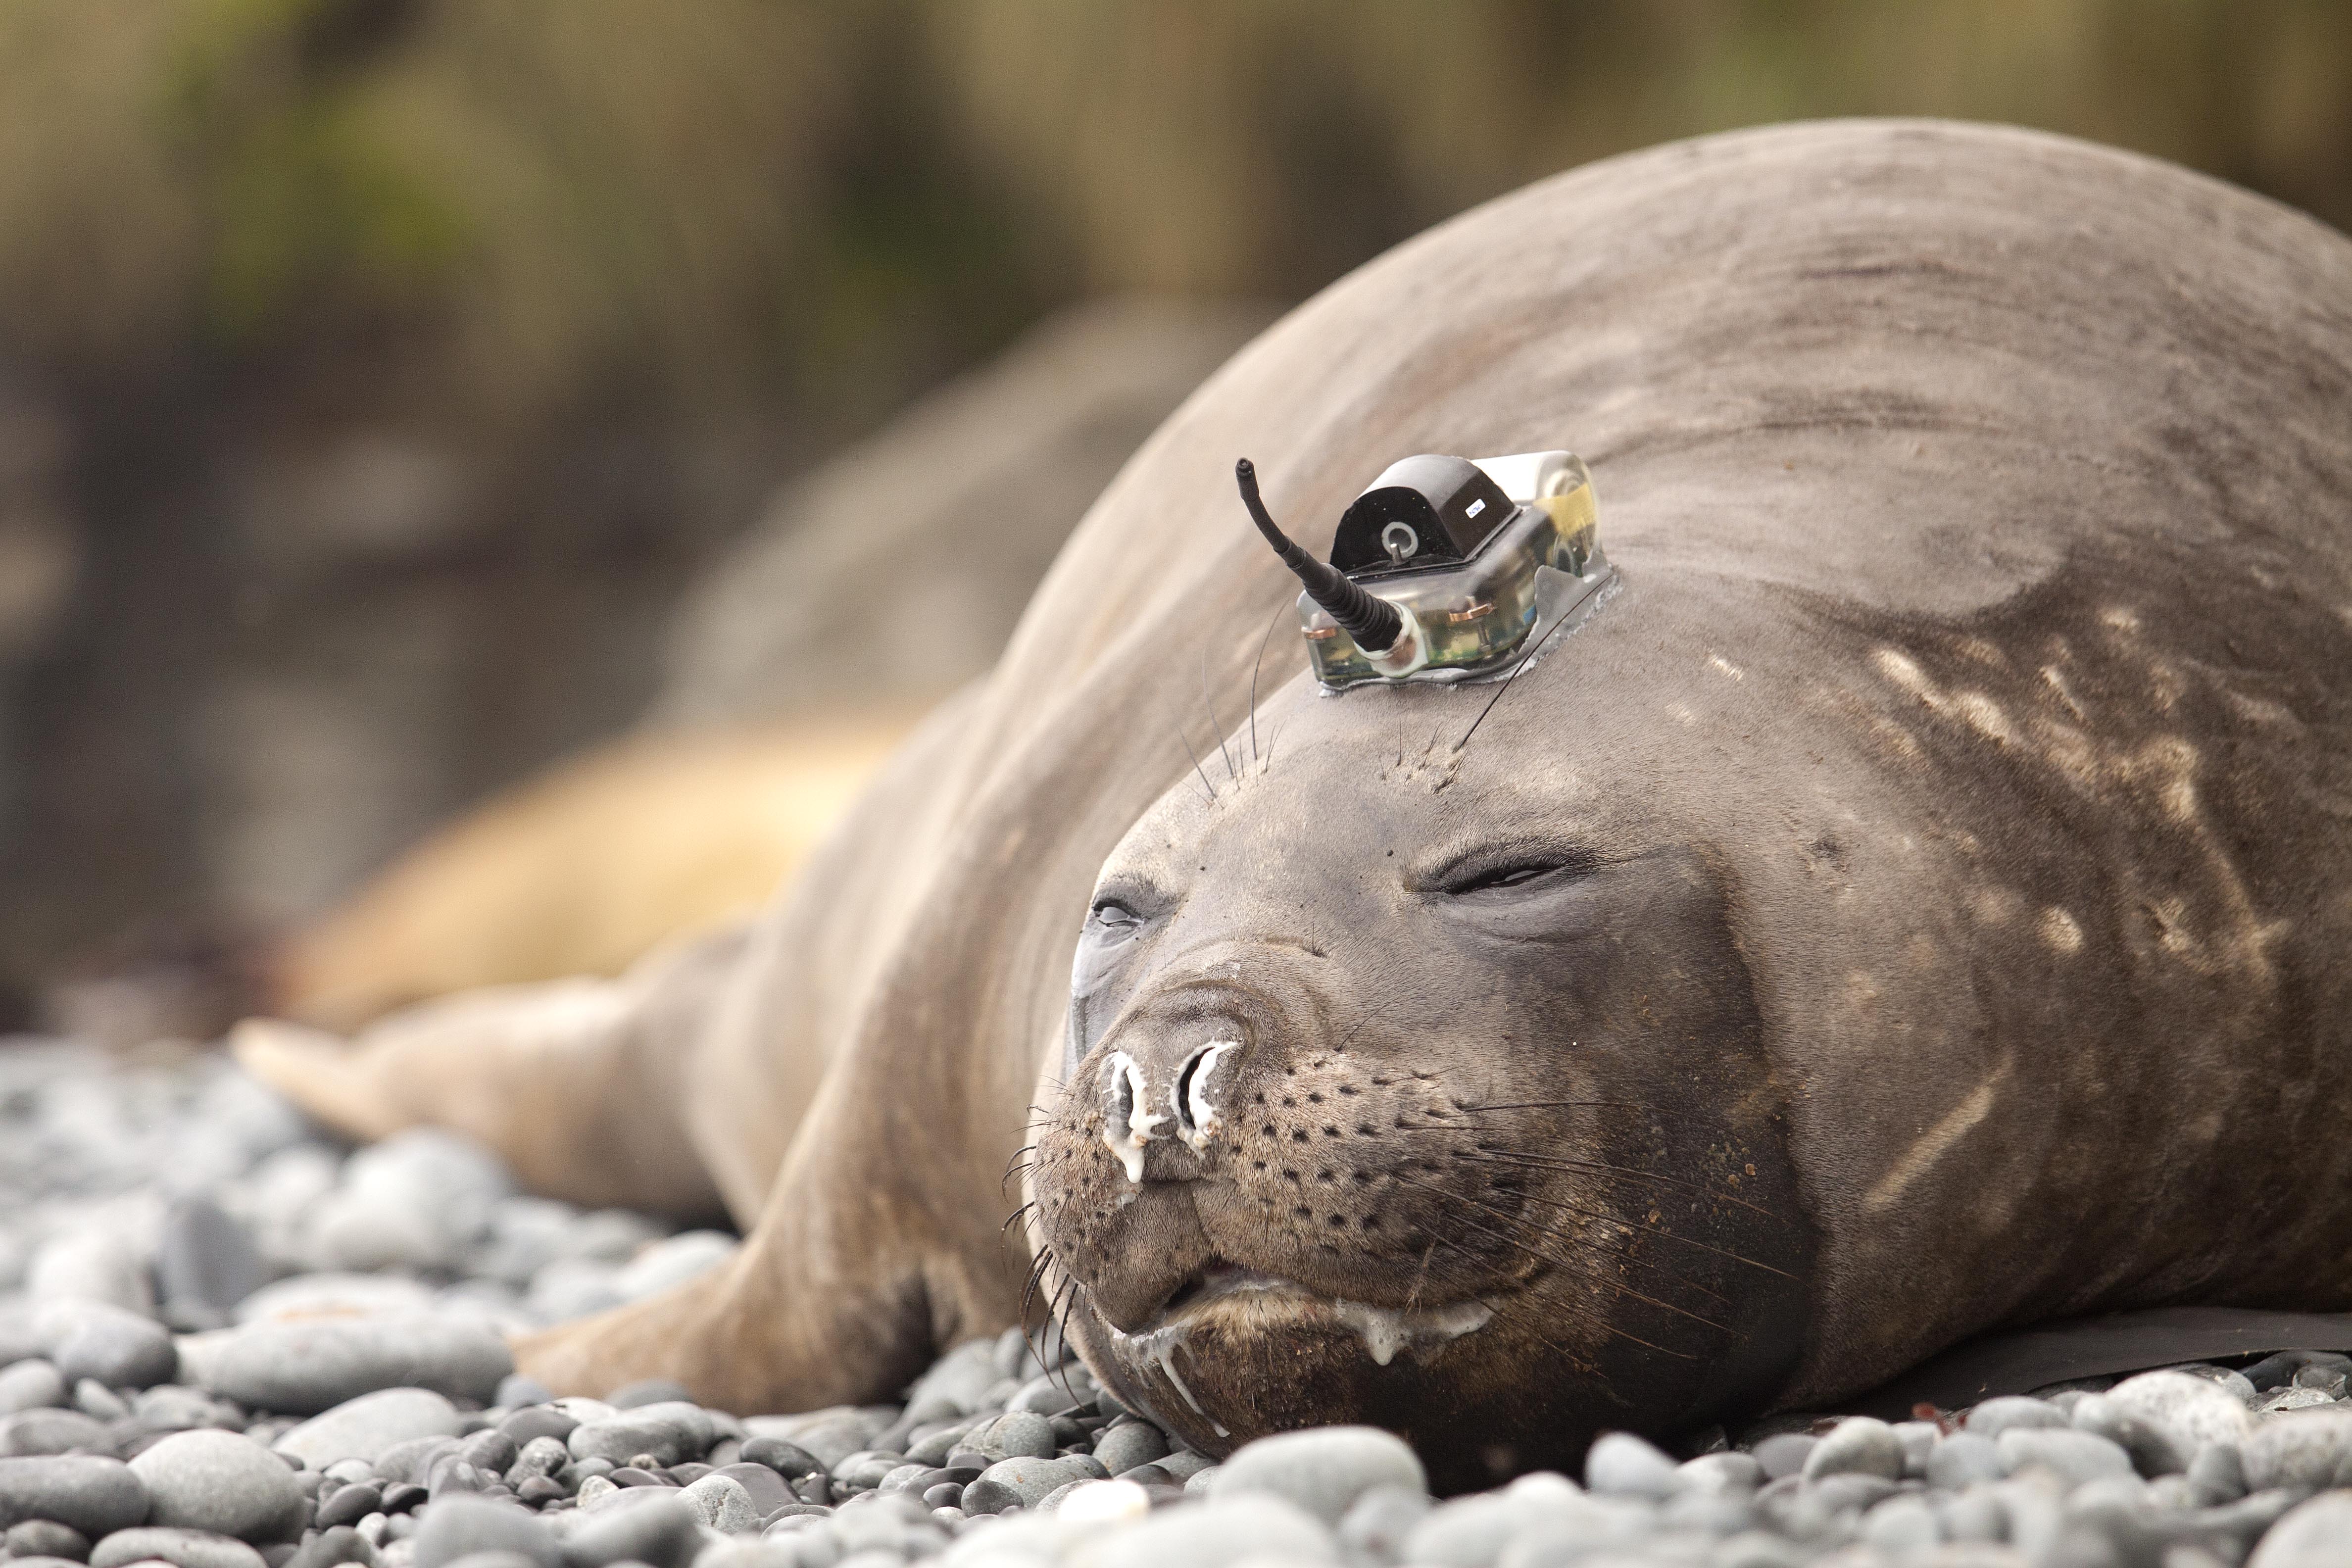 An elephant seal with an electronic tag on its head